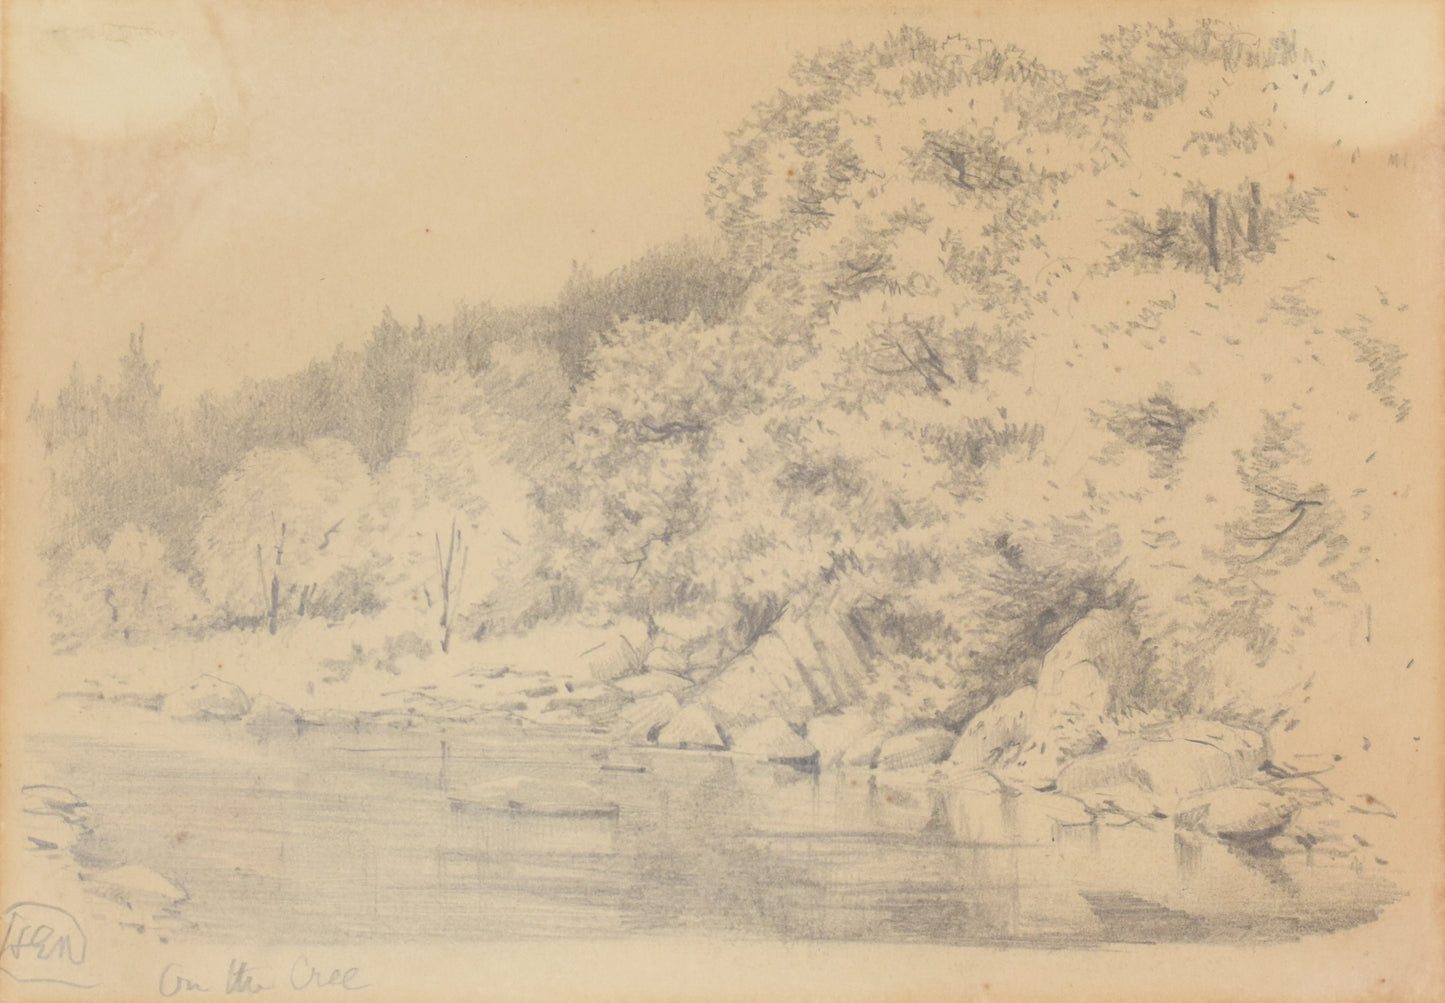 'On The Cree' Landscape Drawing of a River